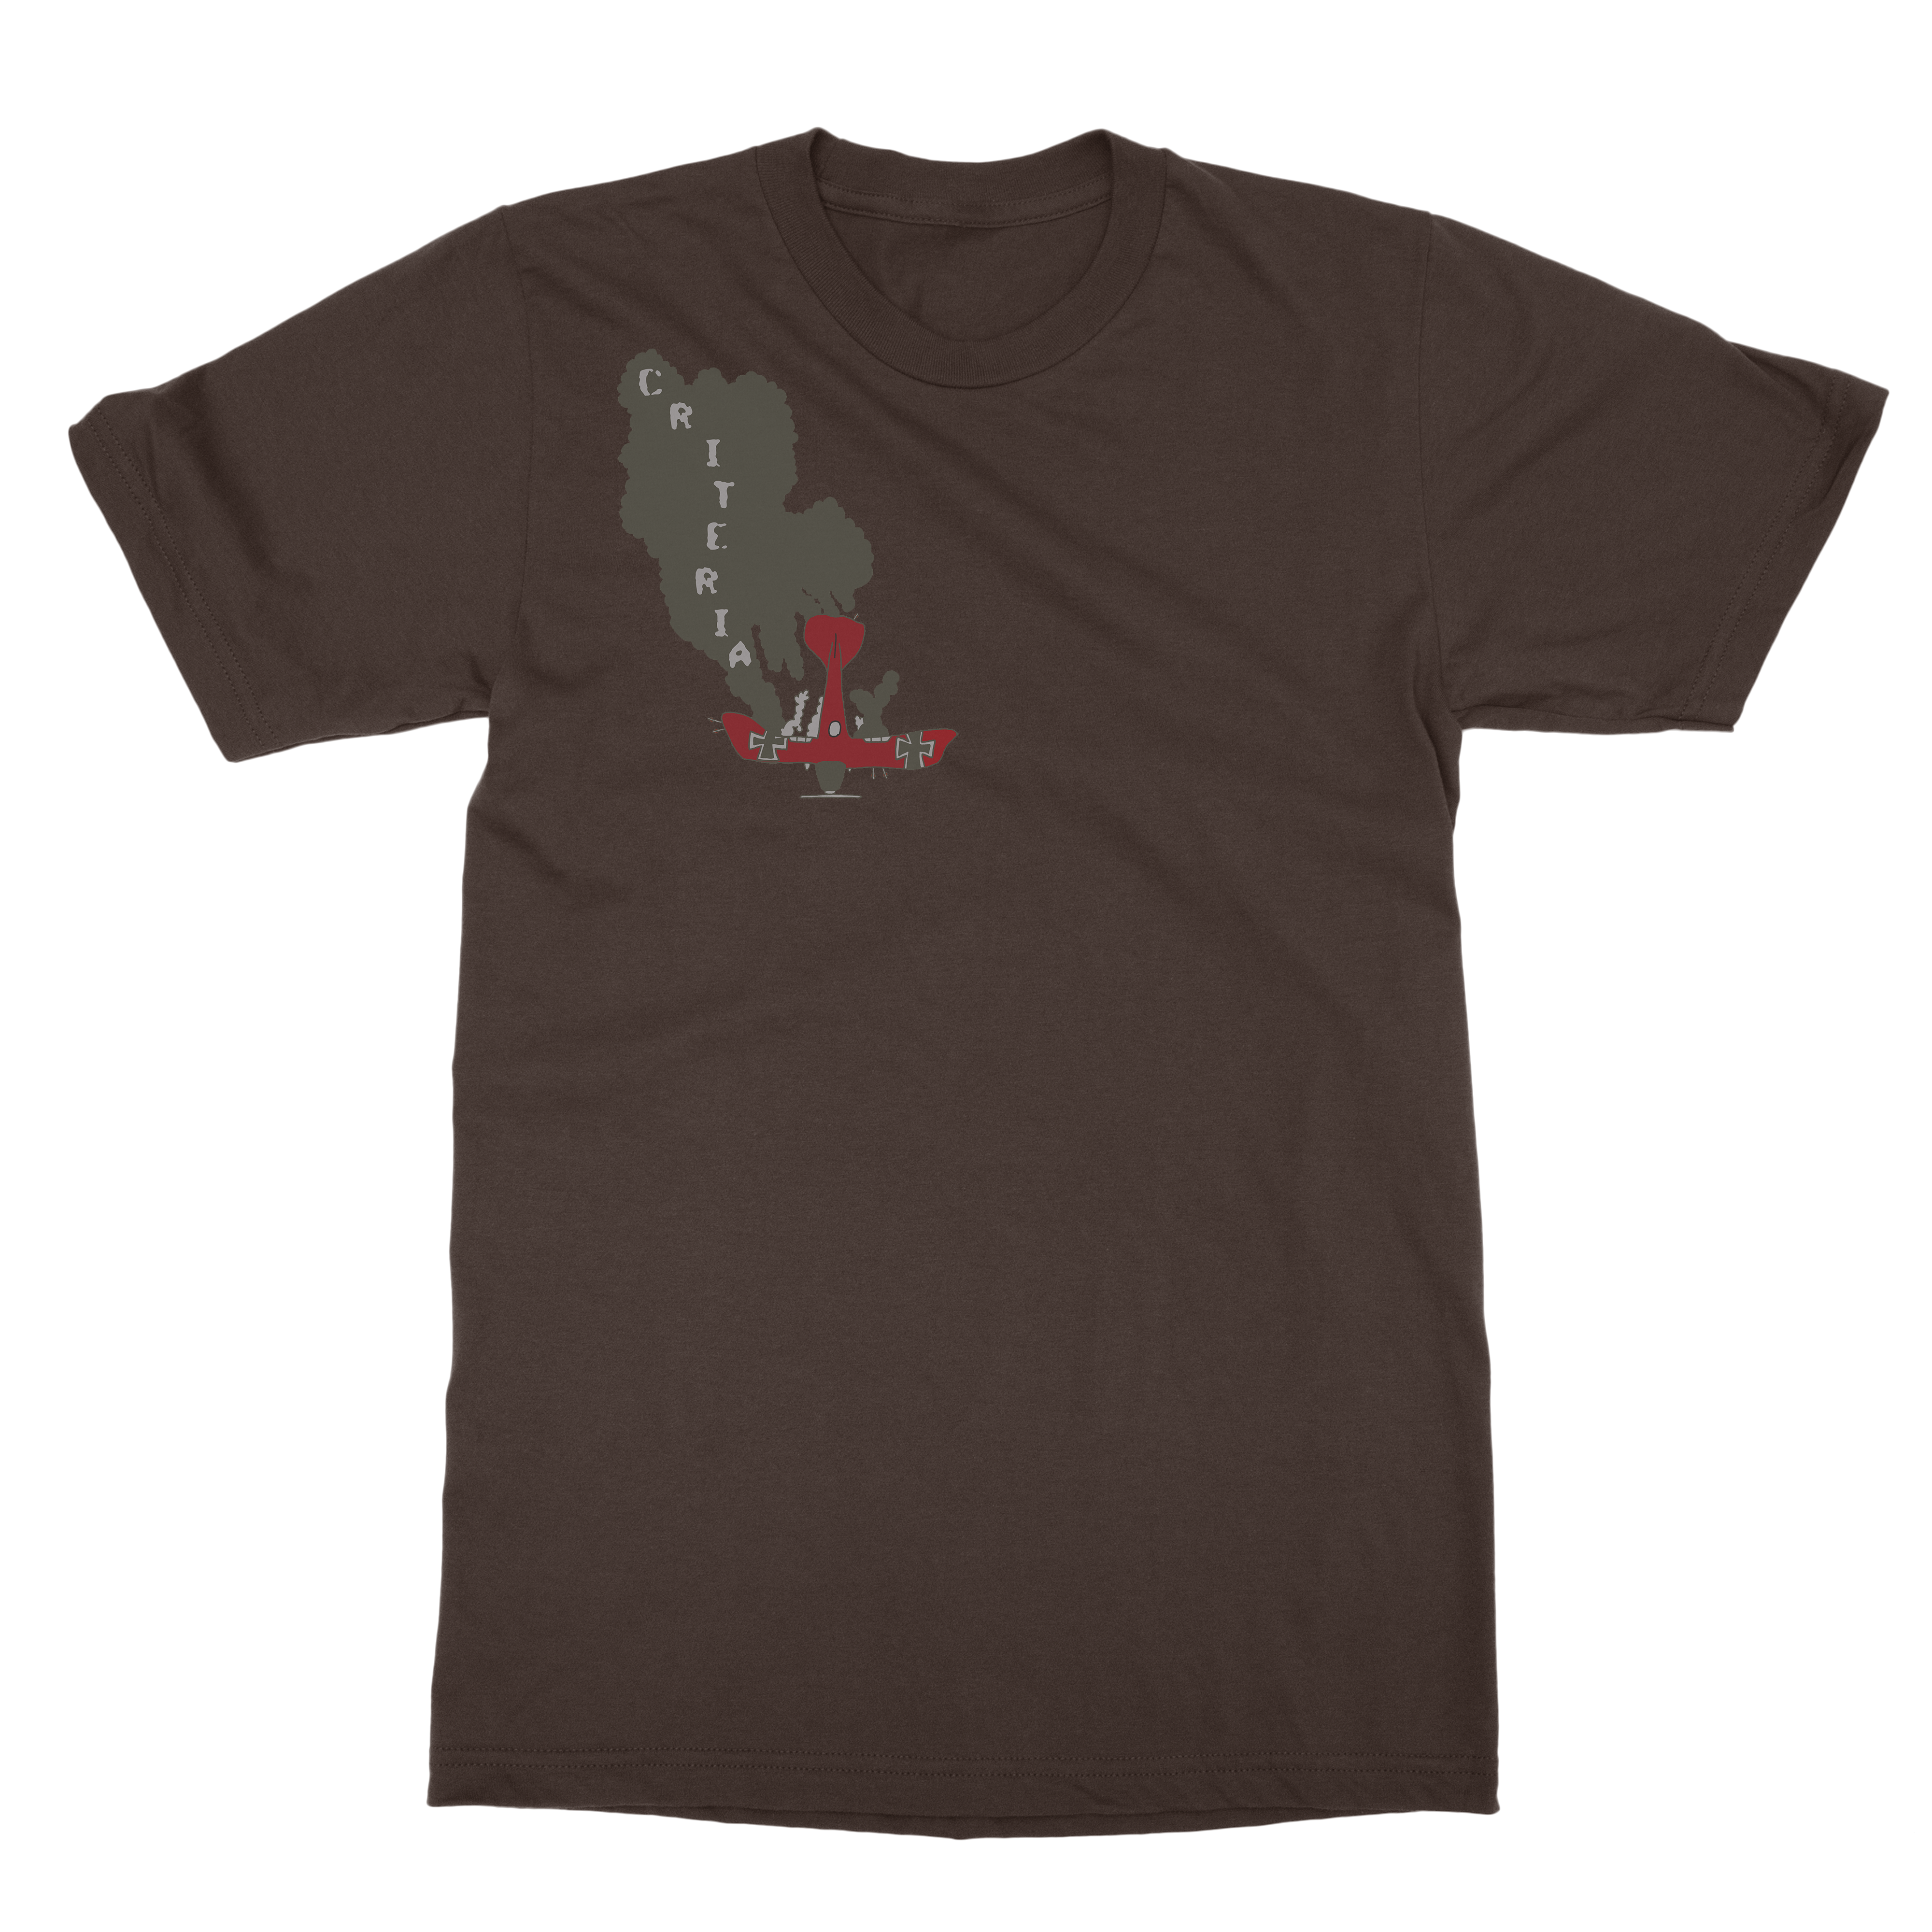 Criteria Plane Crash T-Shirt is a brown tee that has a grey cloud spelling out criteria coming out of a red crashing plane